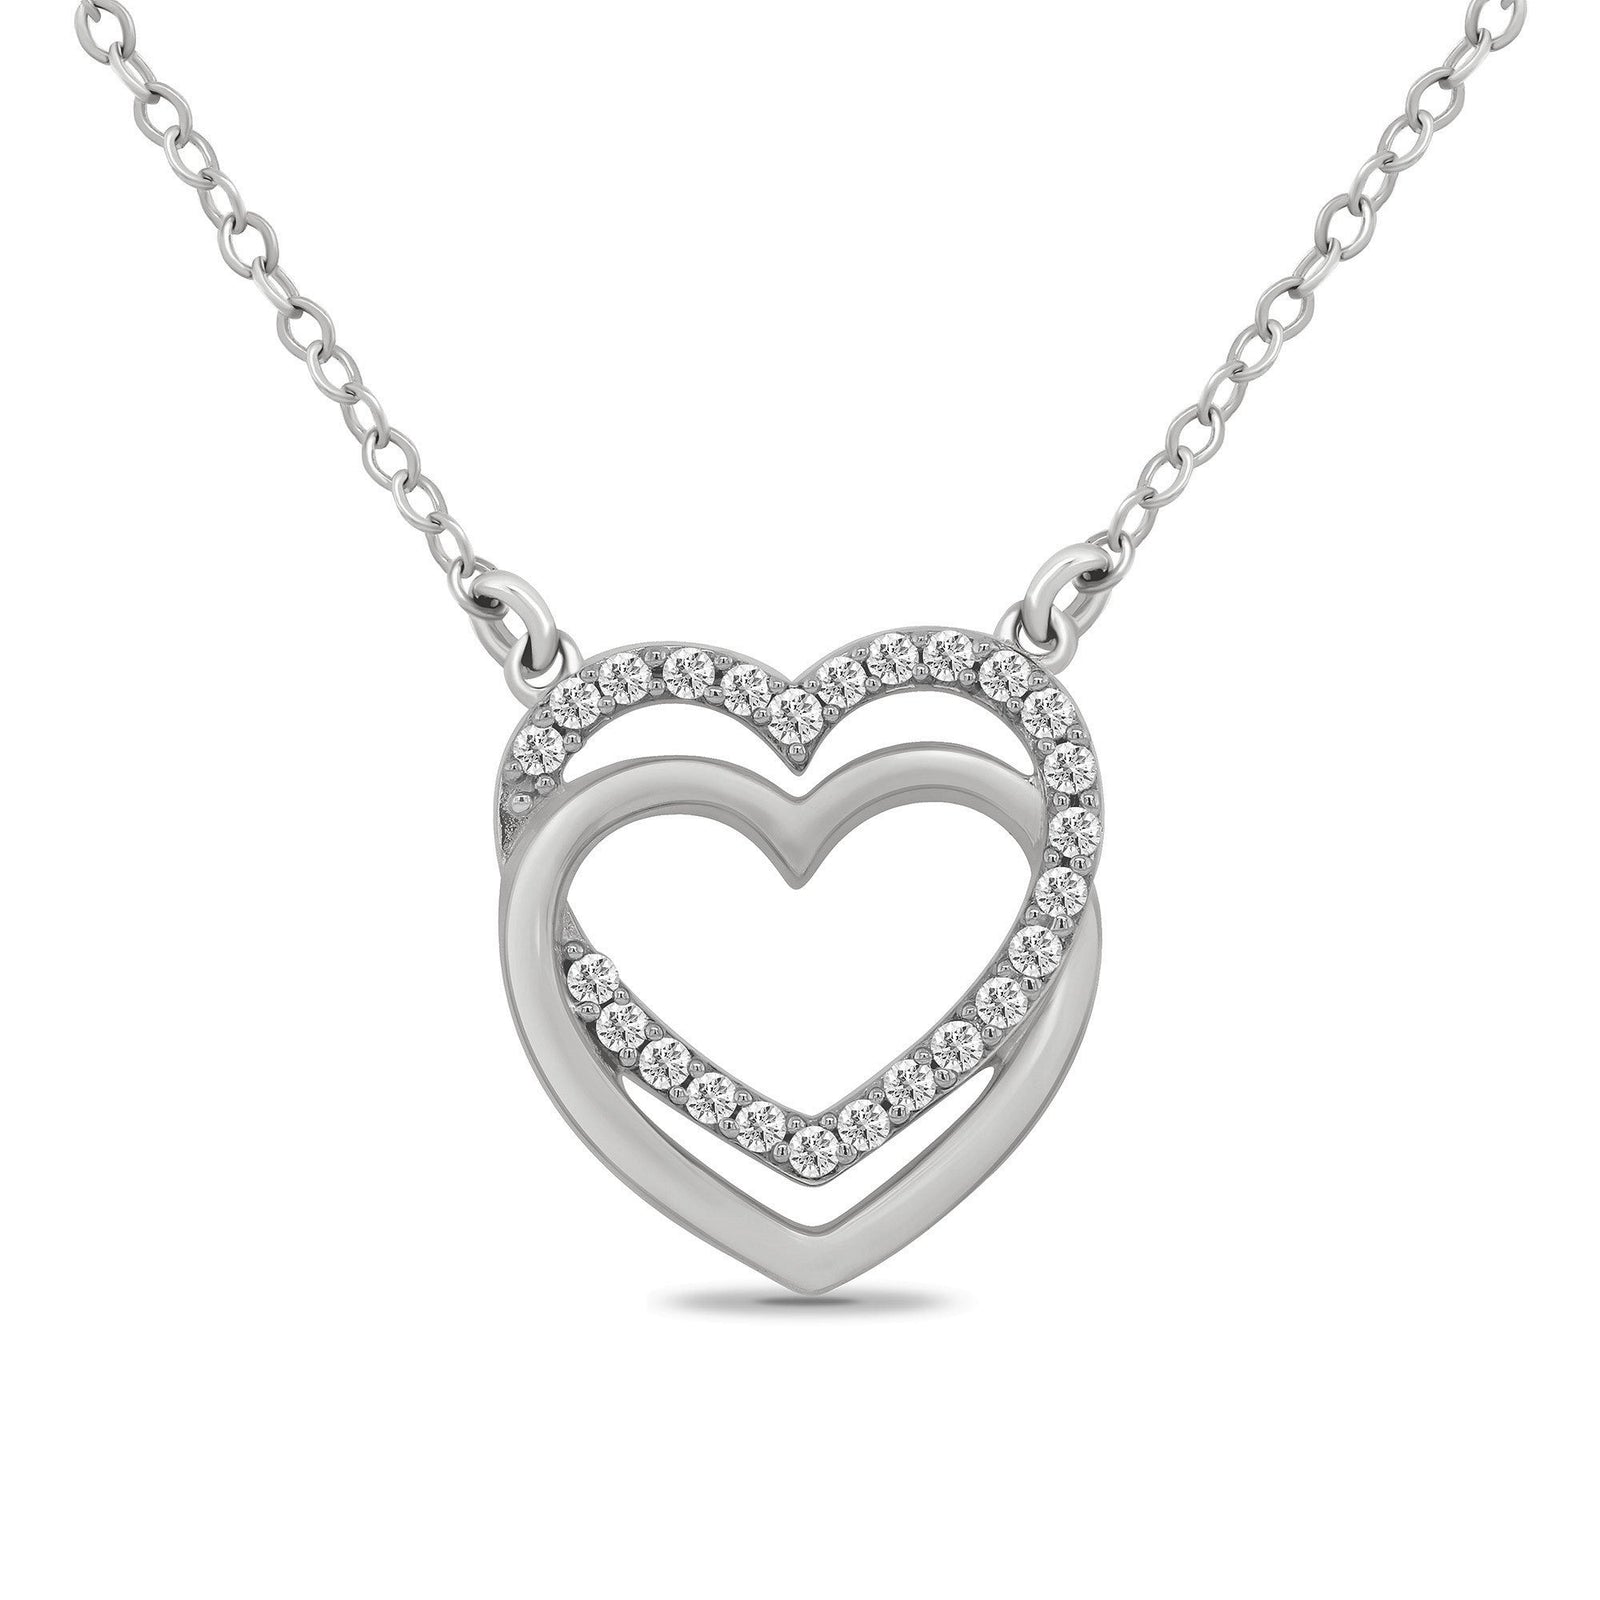 9ct white gold diamond set heart & entwined plain heart pendant with 18" chain (included ) 0.13ct